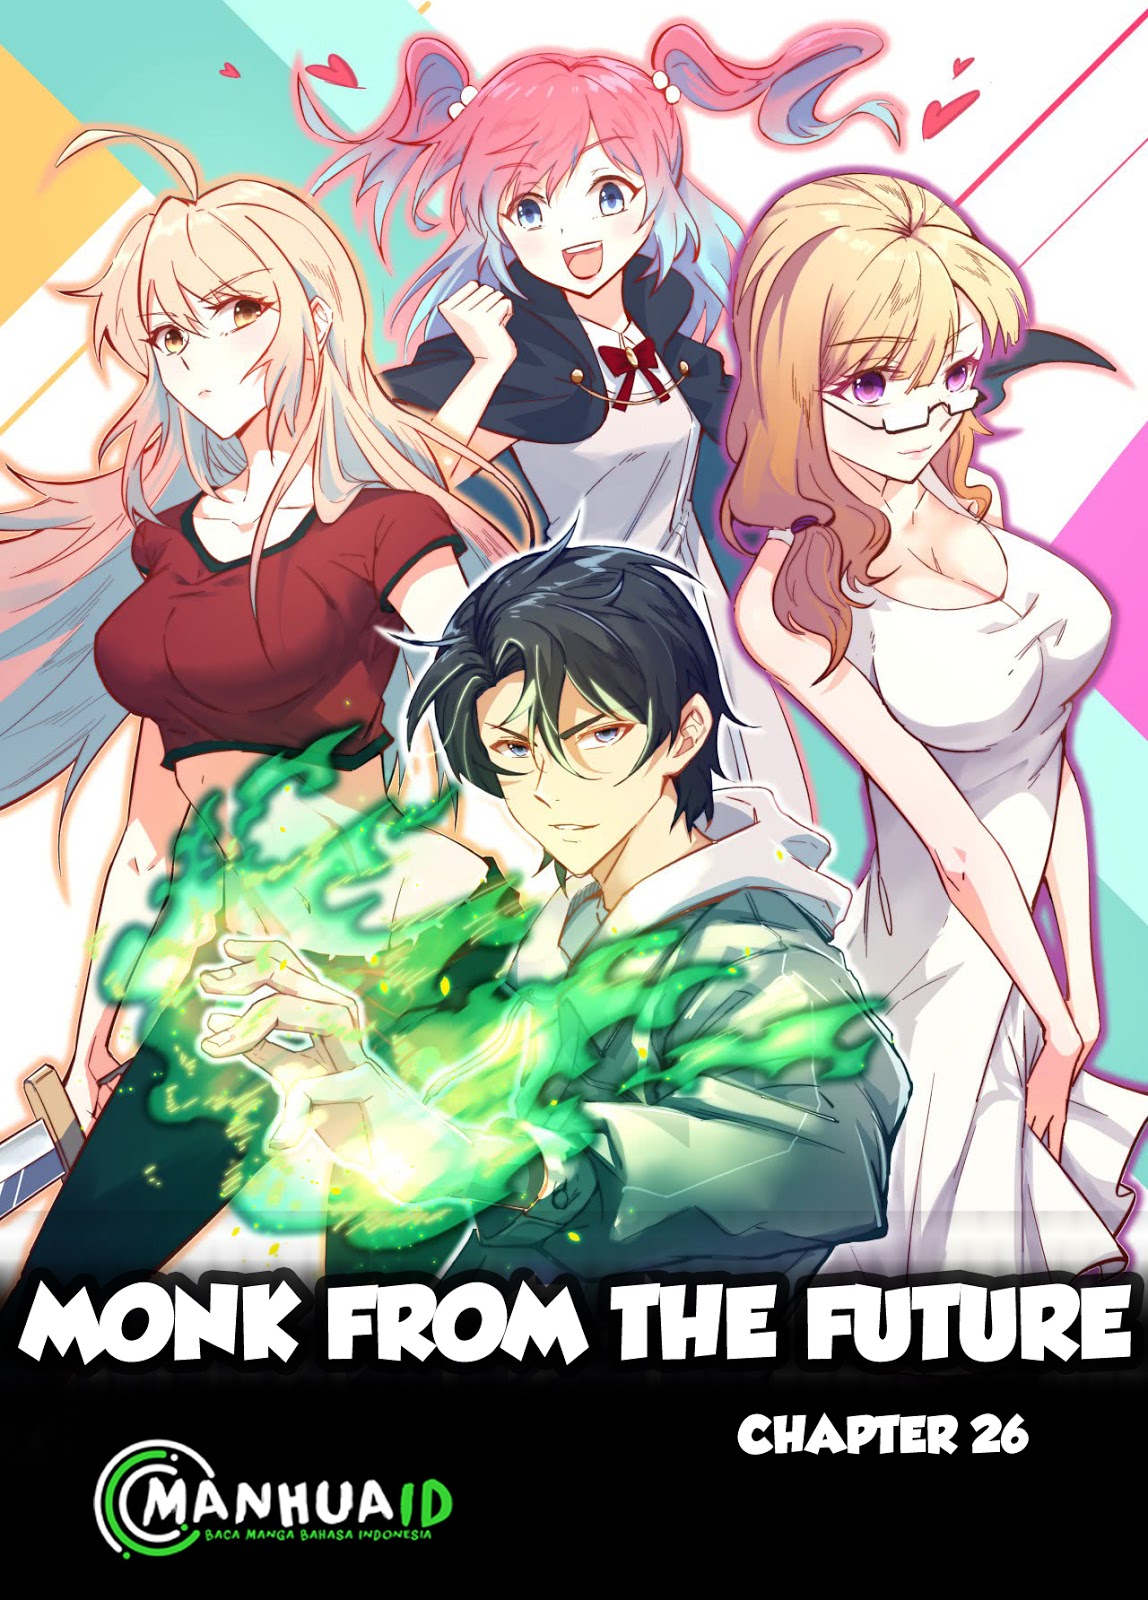 Monk From the Future Chapter 26